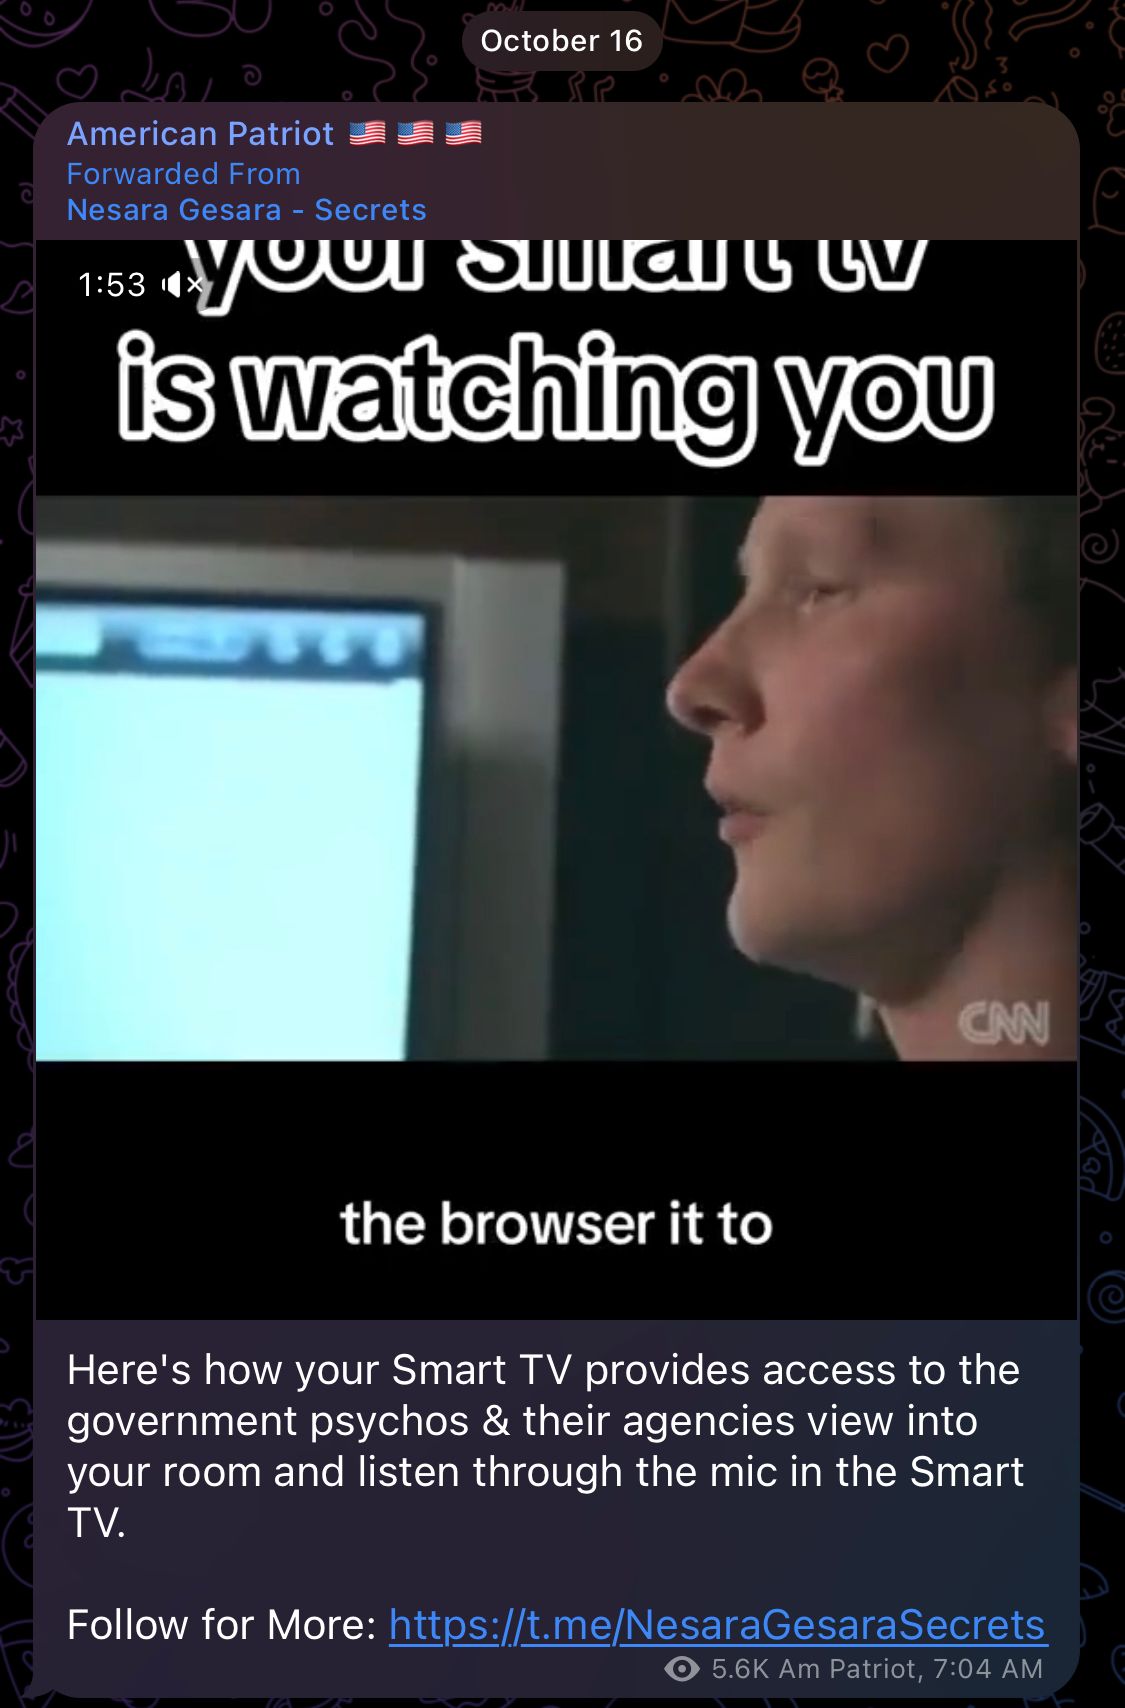 Here's how your Smart TV provides access to the government psychos & their agencies